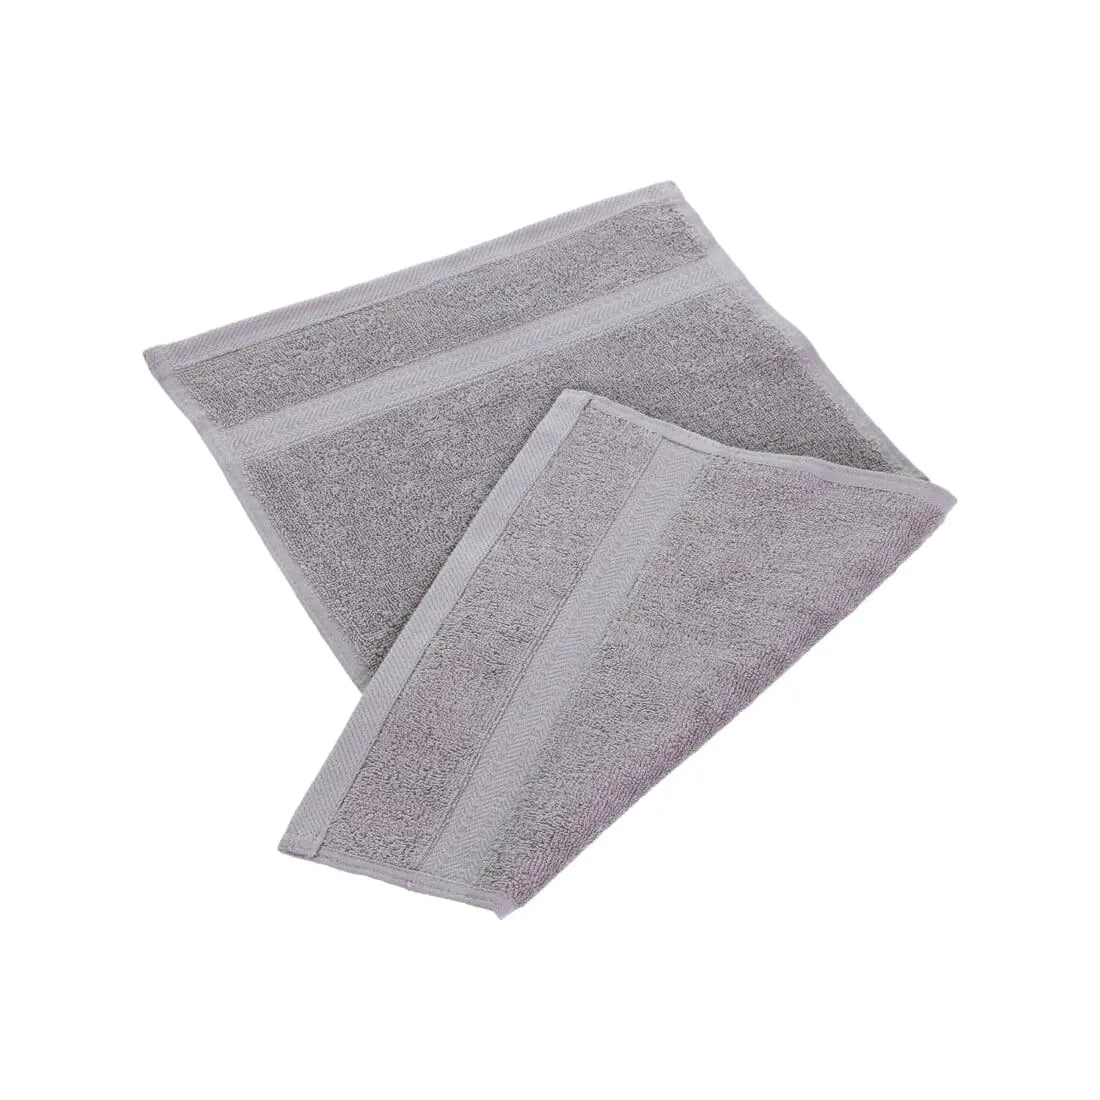 Light grey egyptian cotton towel ideal for the gym